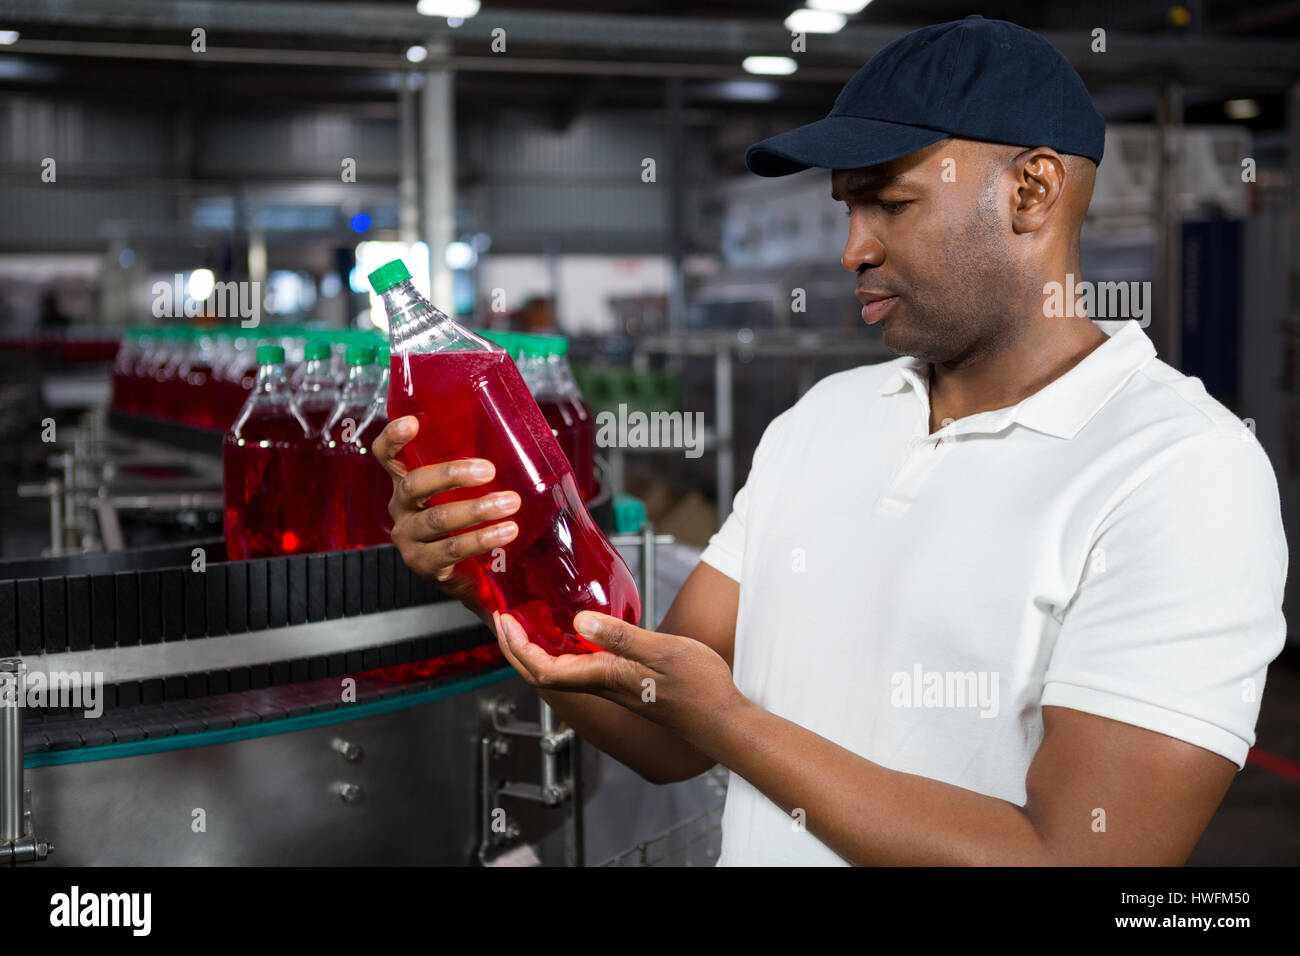 Young male worker inspecting juice bottle in factory Stock Photo